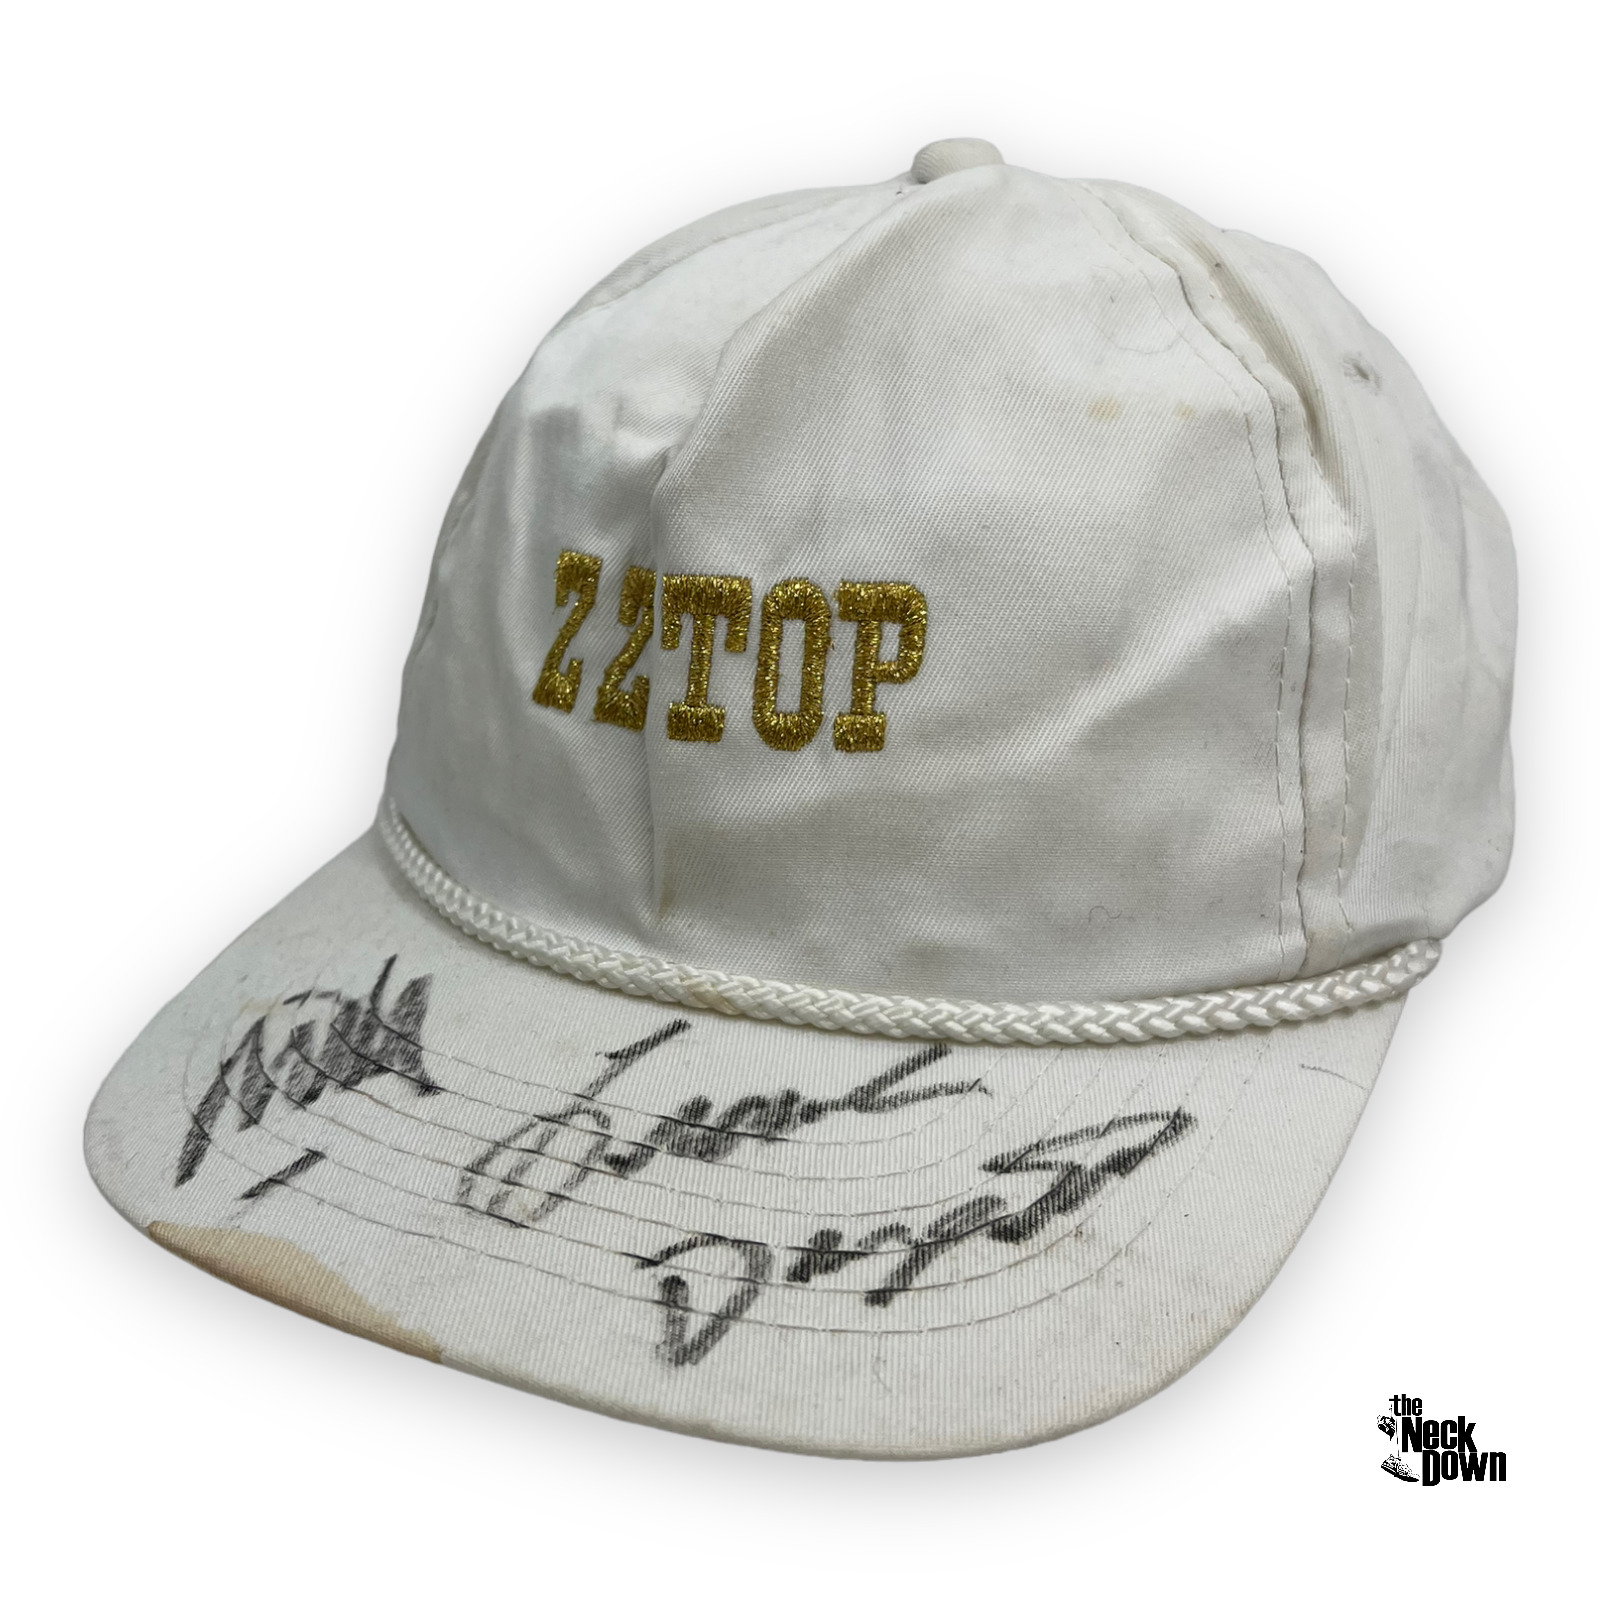 Vintage Zz Top Embroidered Signed Autographed Band Music Snapback Trucker Hat